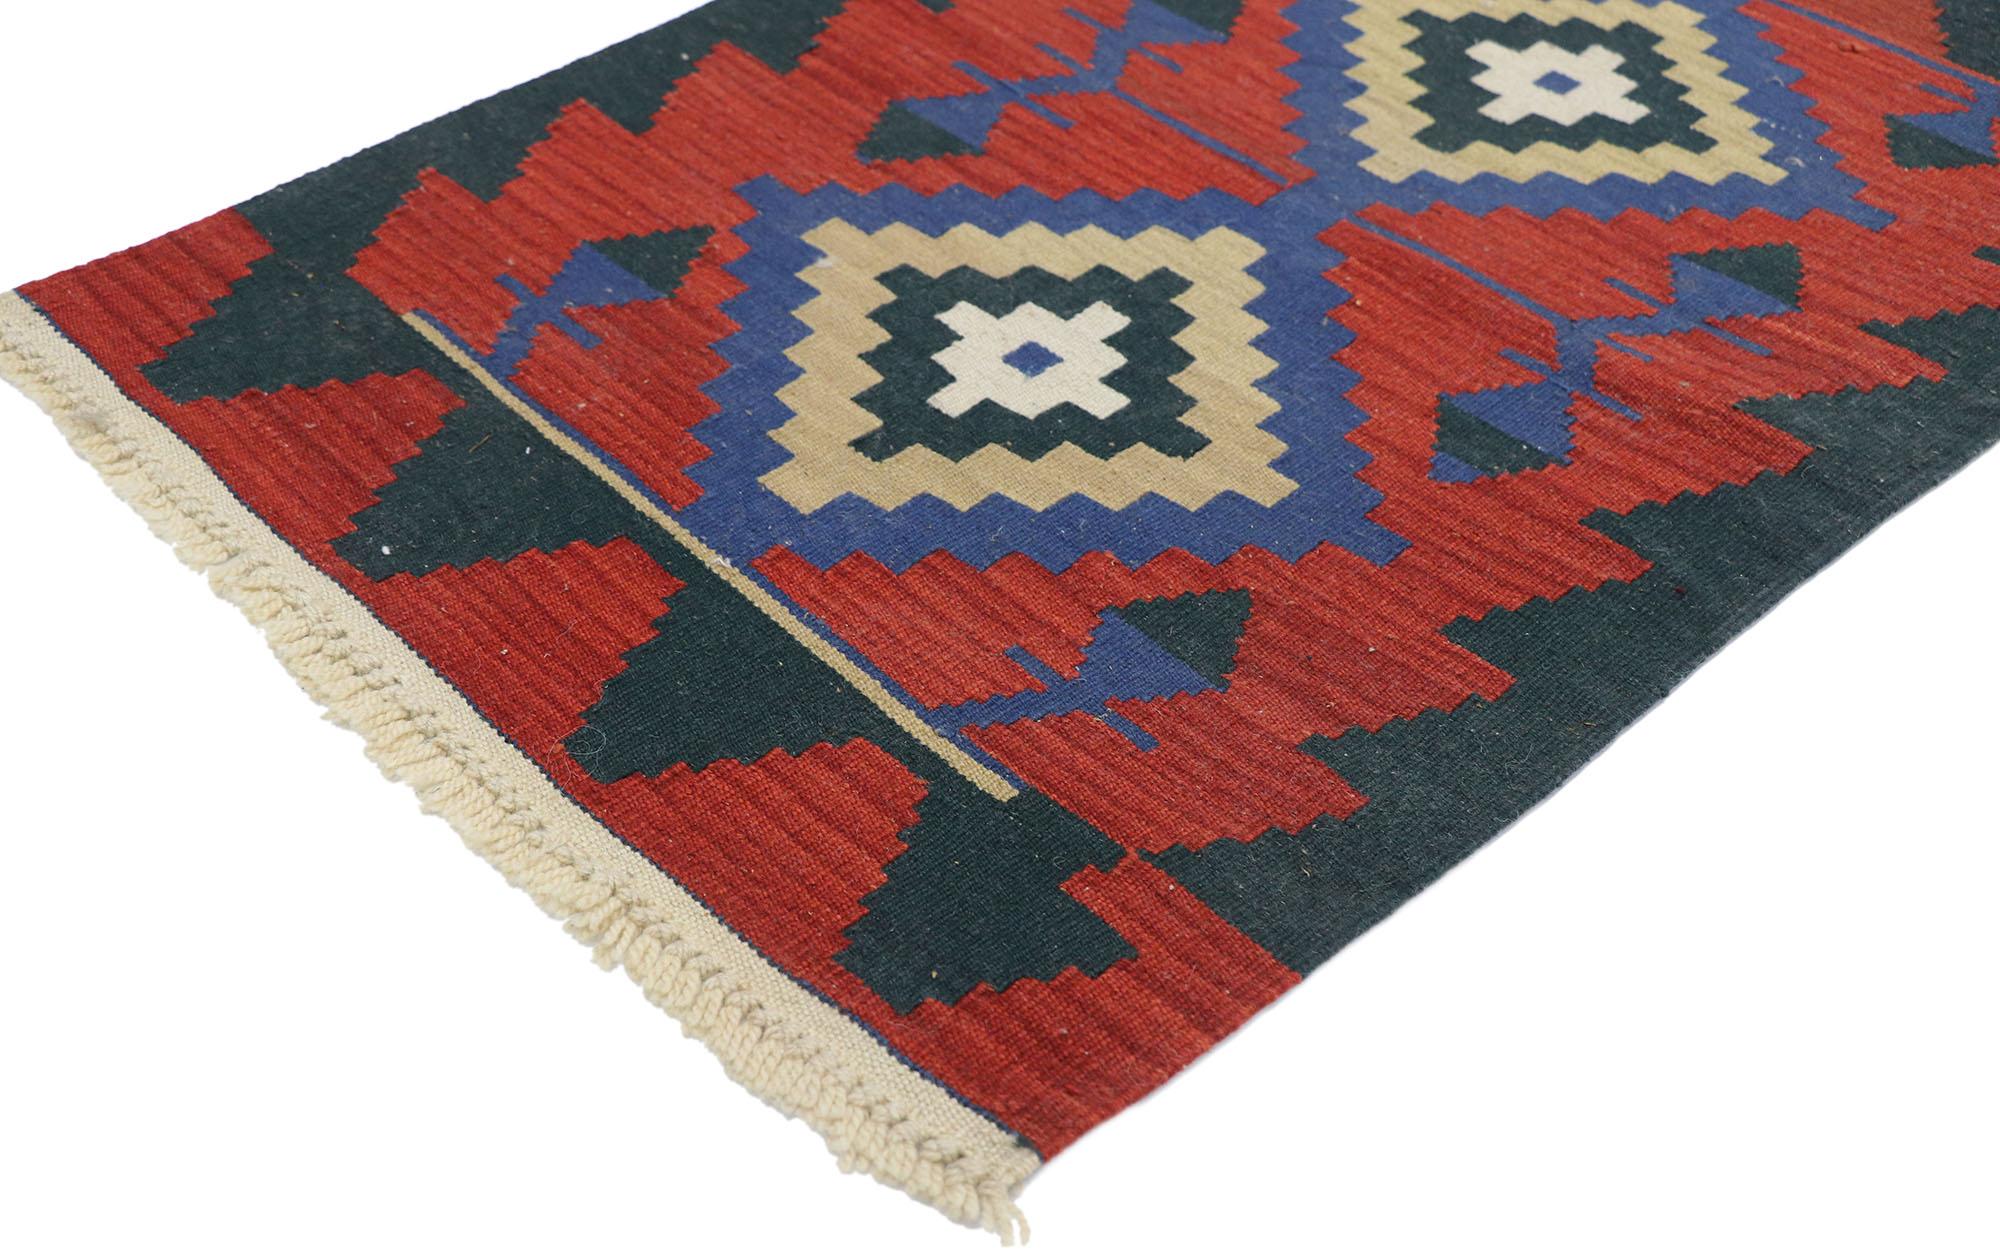 77898 Vintage Persian Shiraz Kilim rug with Tribal style 02'00 x 02'11. Full of tiny details and a bold expressive design combined with vibrant colors and tribal style, this hand-woven wool vintage Persian Shiraz kilim rug is a captivating vision of